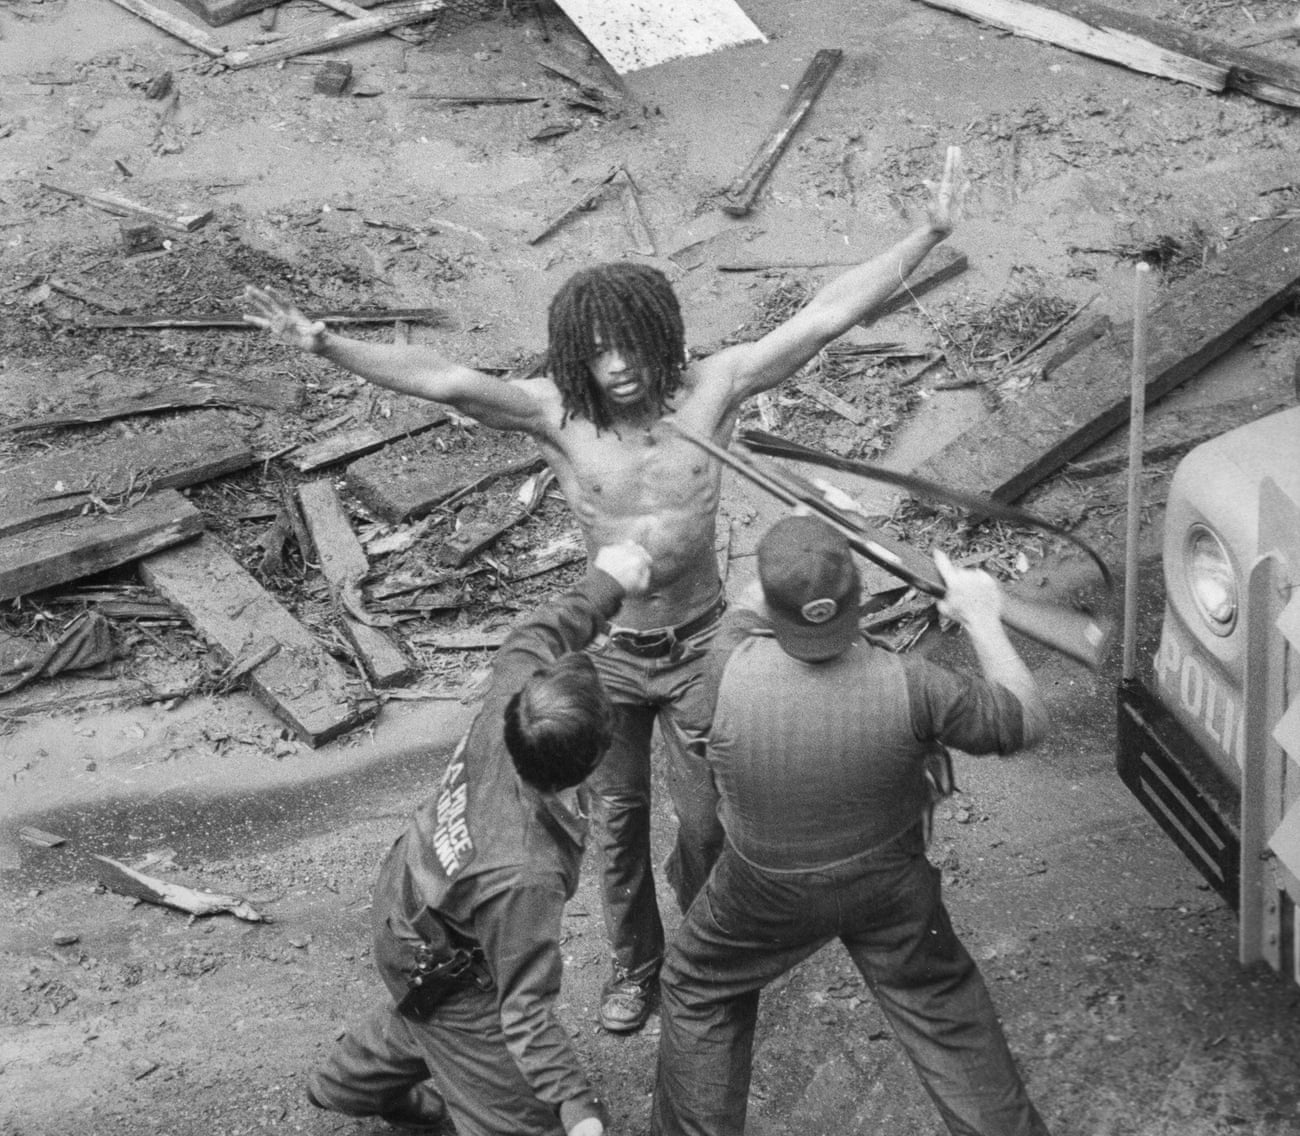 The arrest of Delbert Africa of MOVE on 8 August 1978. 